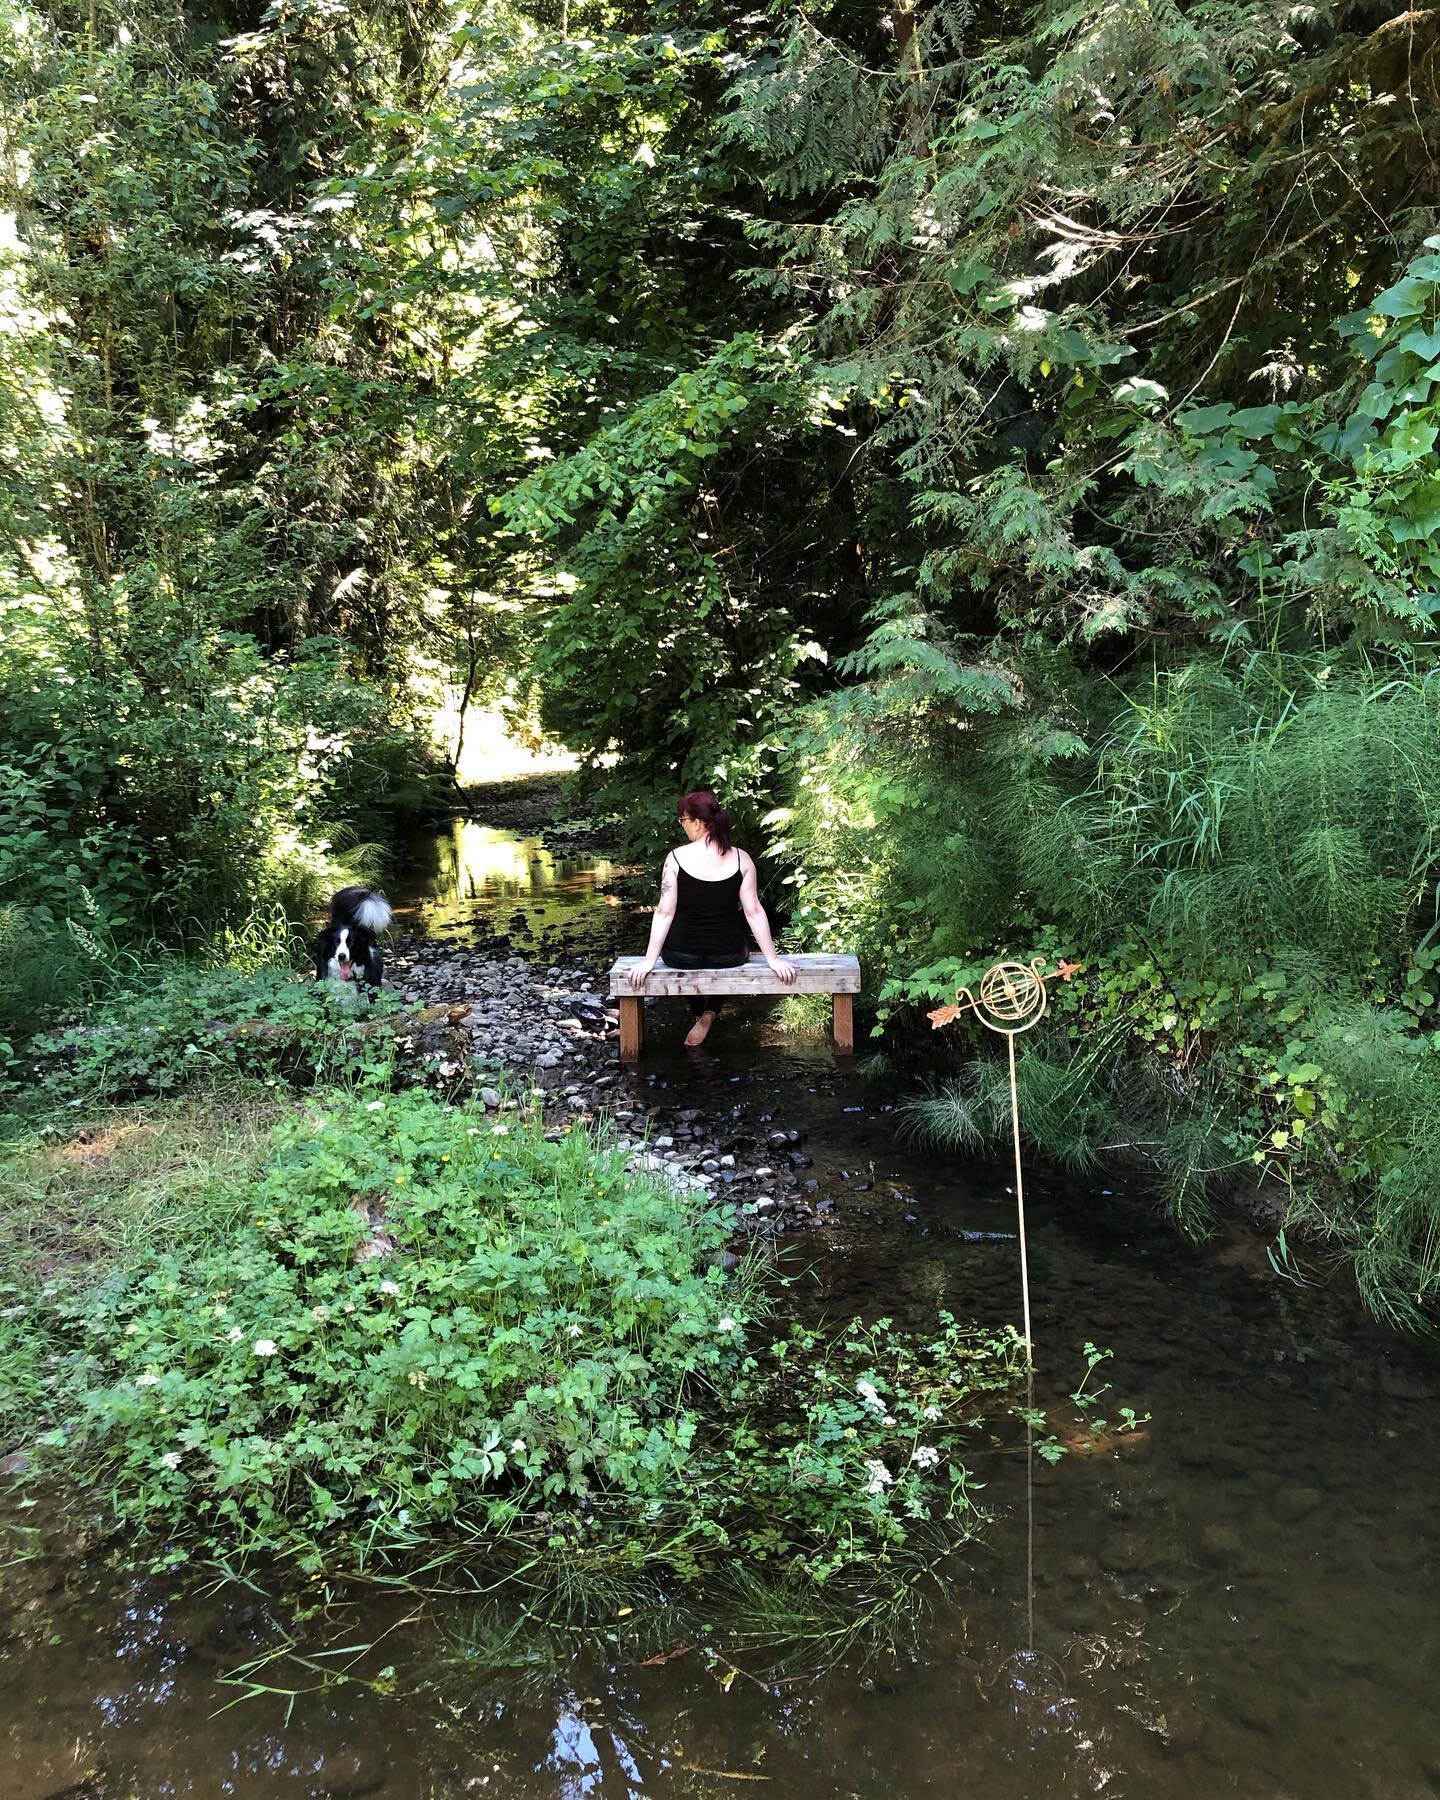 Tomorrow is going to be super crazy hot in the PNW. That shouldn&rsquo;t stop you from coming by my Open Art Studio and Open House for @theverdancyproject.
We have lots of shade and a very cool creek to dip your feet in and cool off.
Come early to be